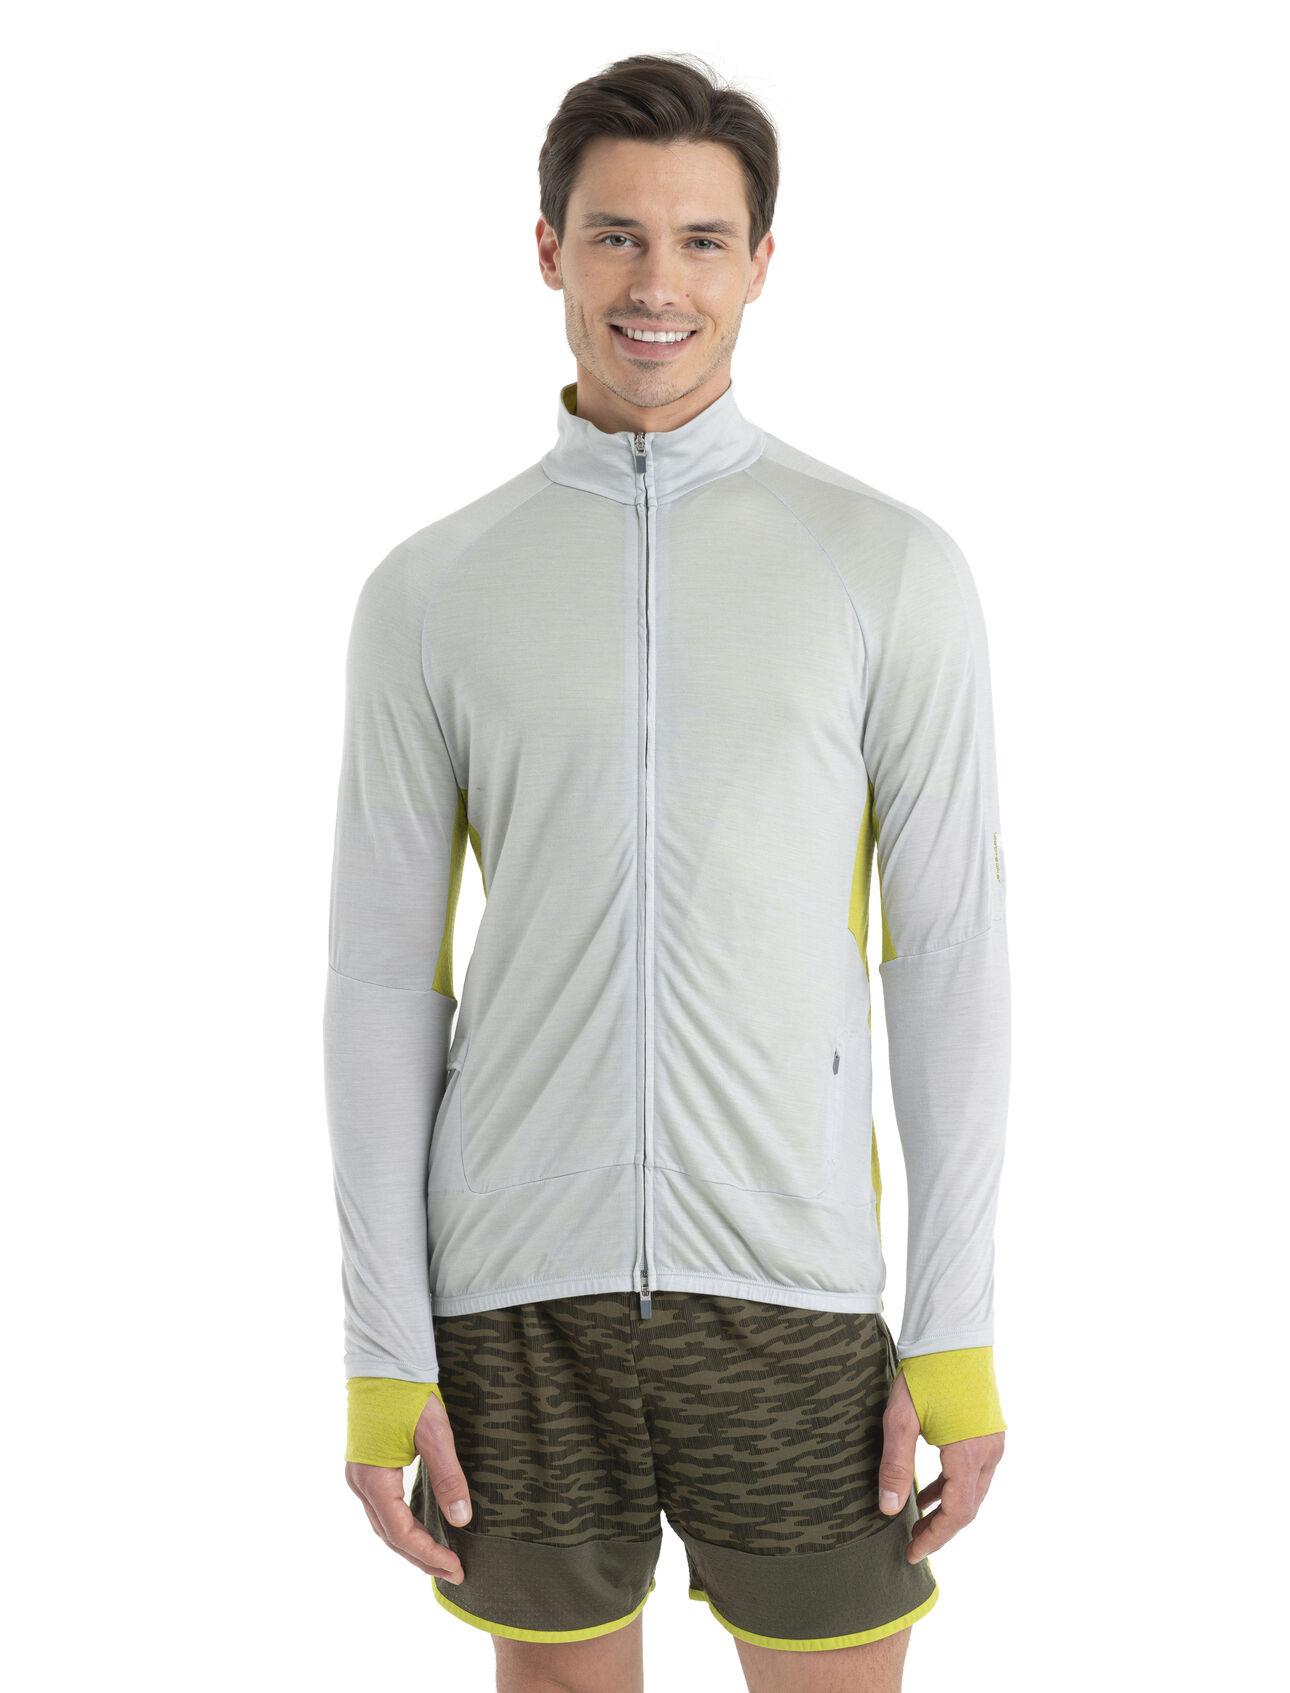 Mens ZoneKnit™ Merino Long Sleeve Zip Top A lightweight midlayer designed to balance warmth and breathability while running, biking or moving fast in the mountains, the ZoneKnit™ Long Sleeve Zip combines our Cool-Lite™ jersey fabric with strategic panels of eyelet mesh for enhanced airflow.